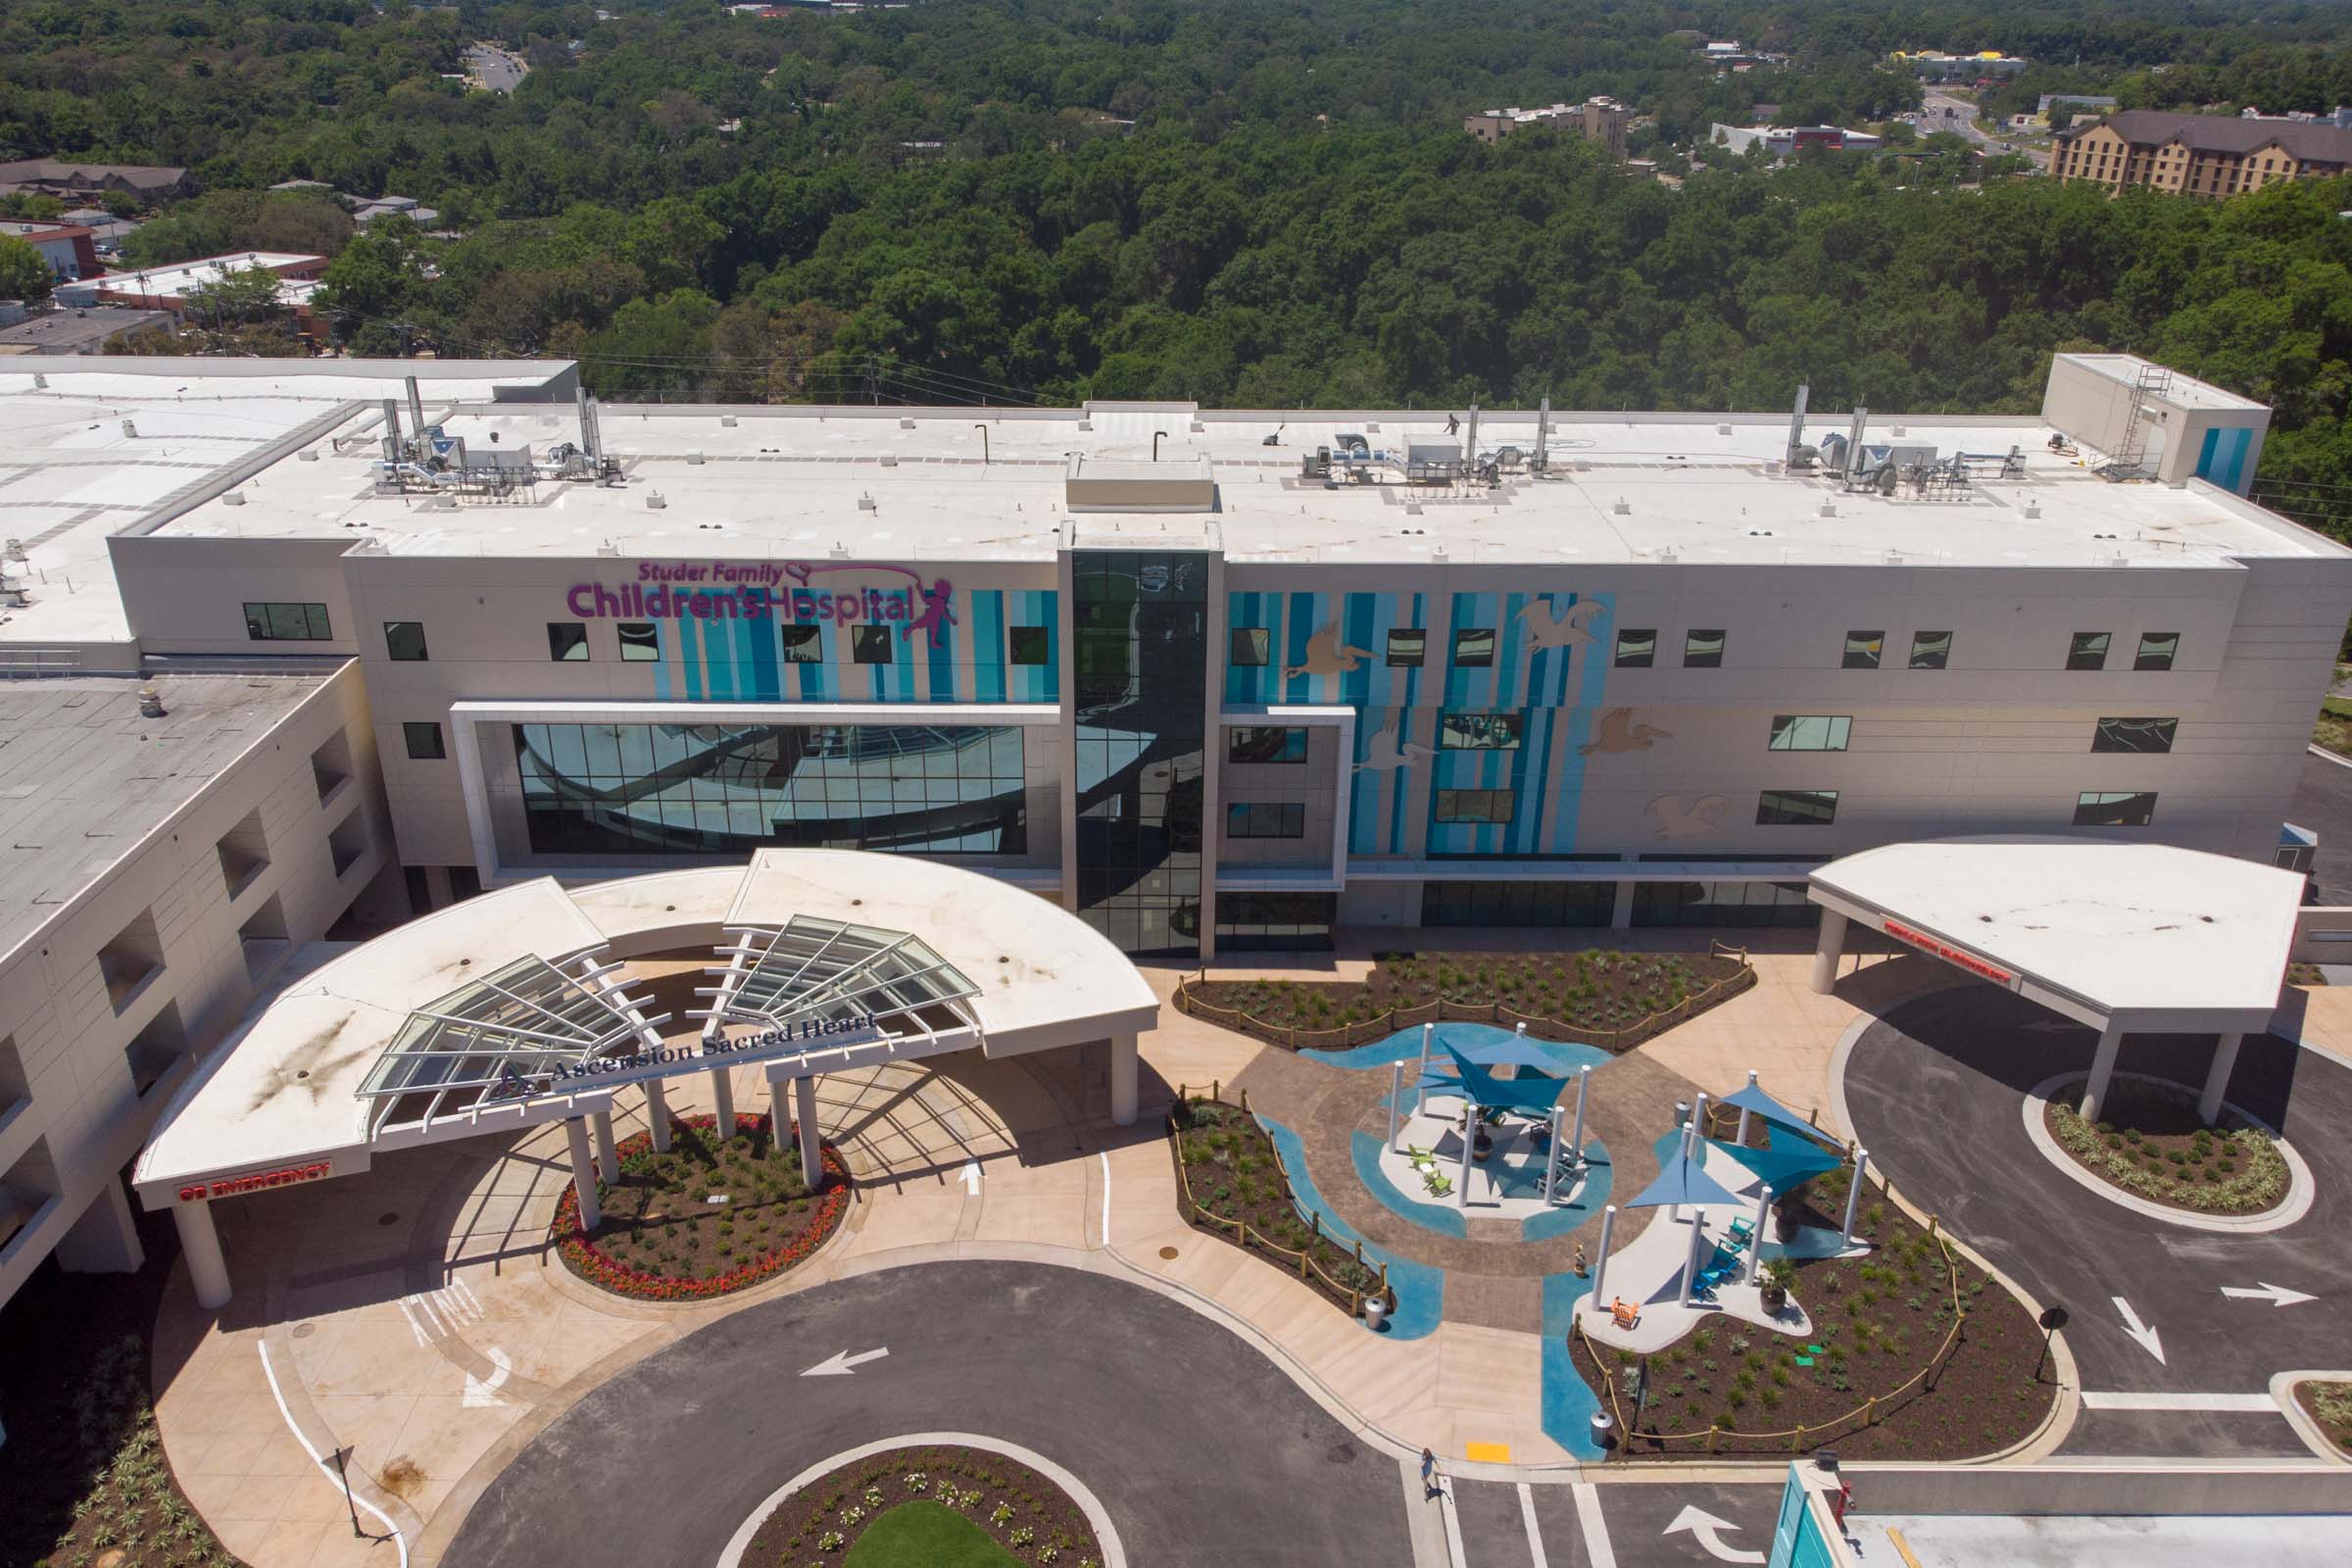 Construction of New Children’s Hospital Addition in NW Florida Had to Weather Several Storms